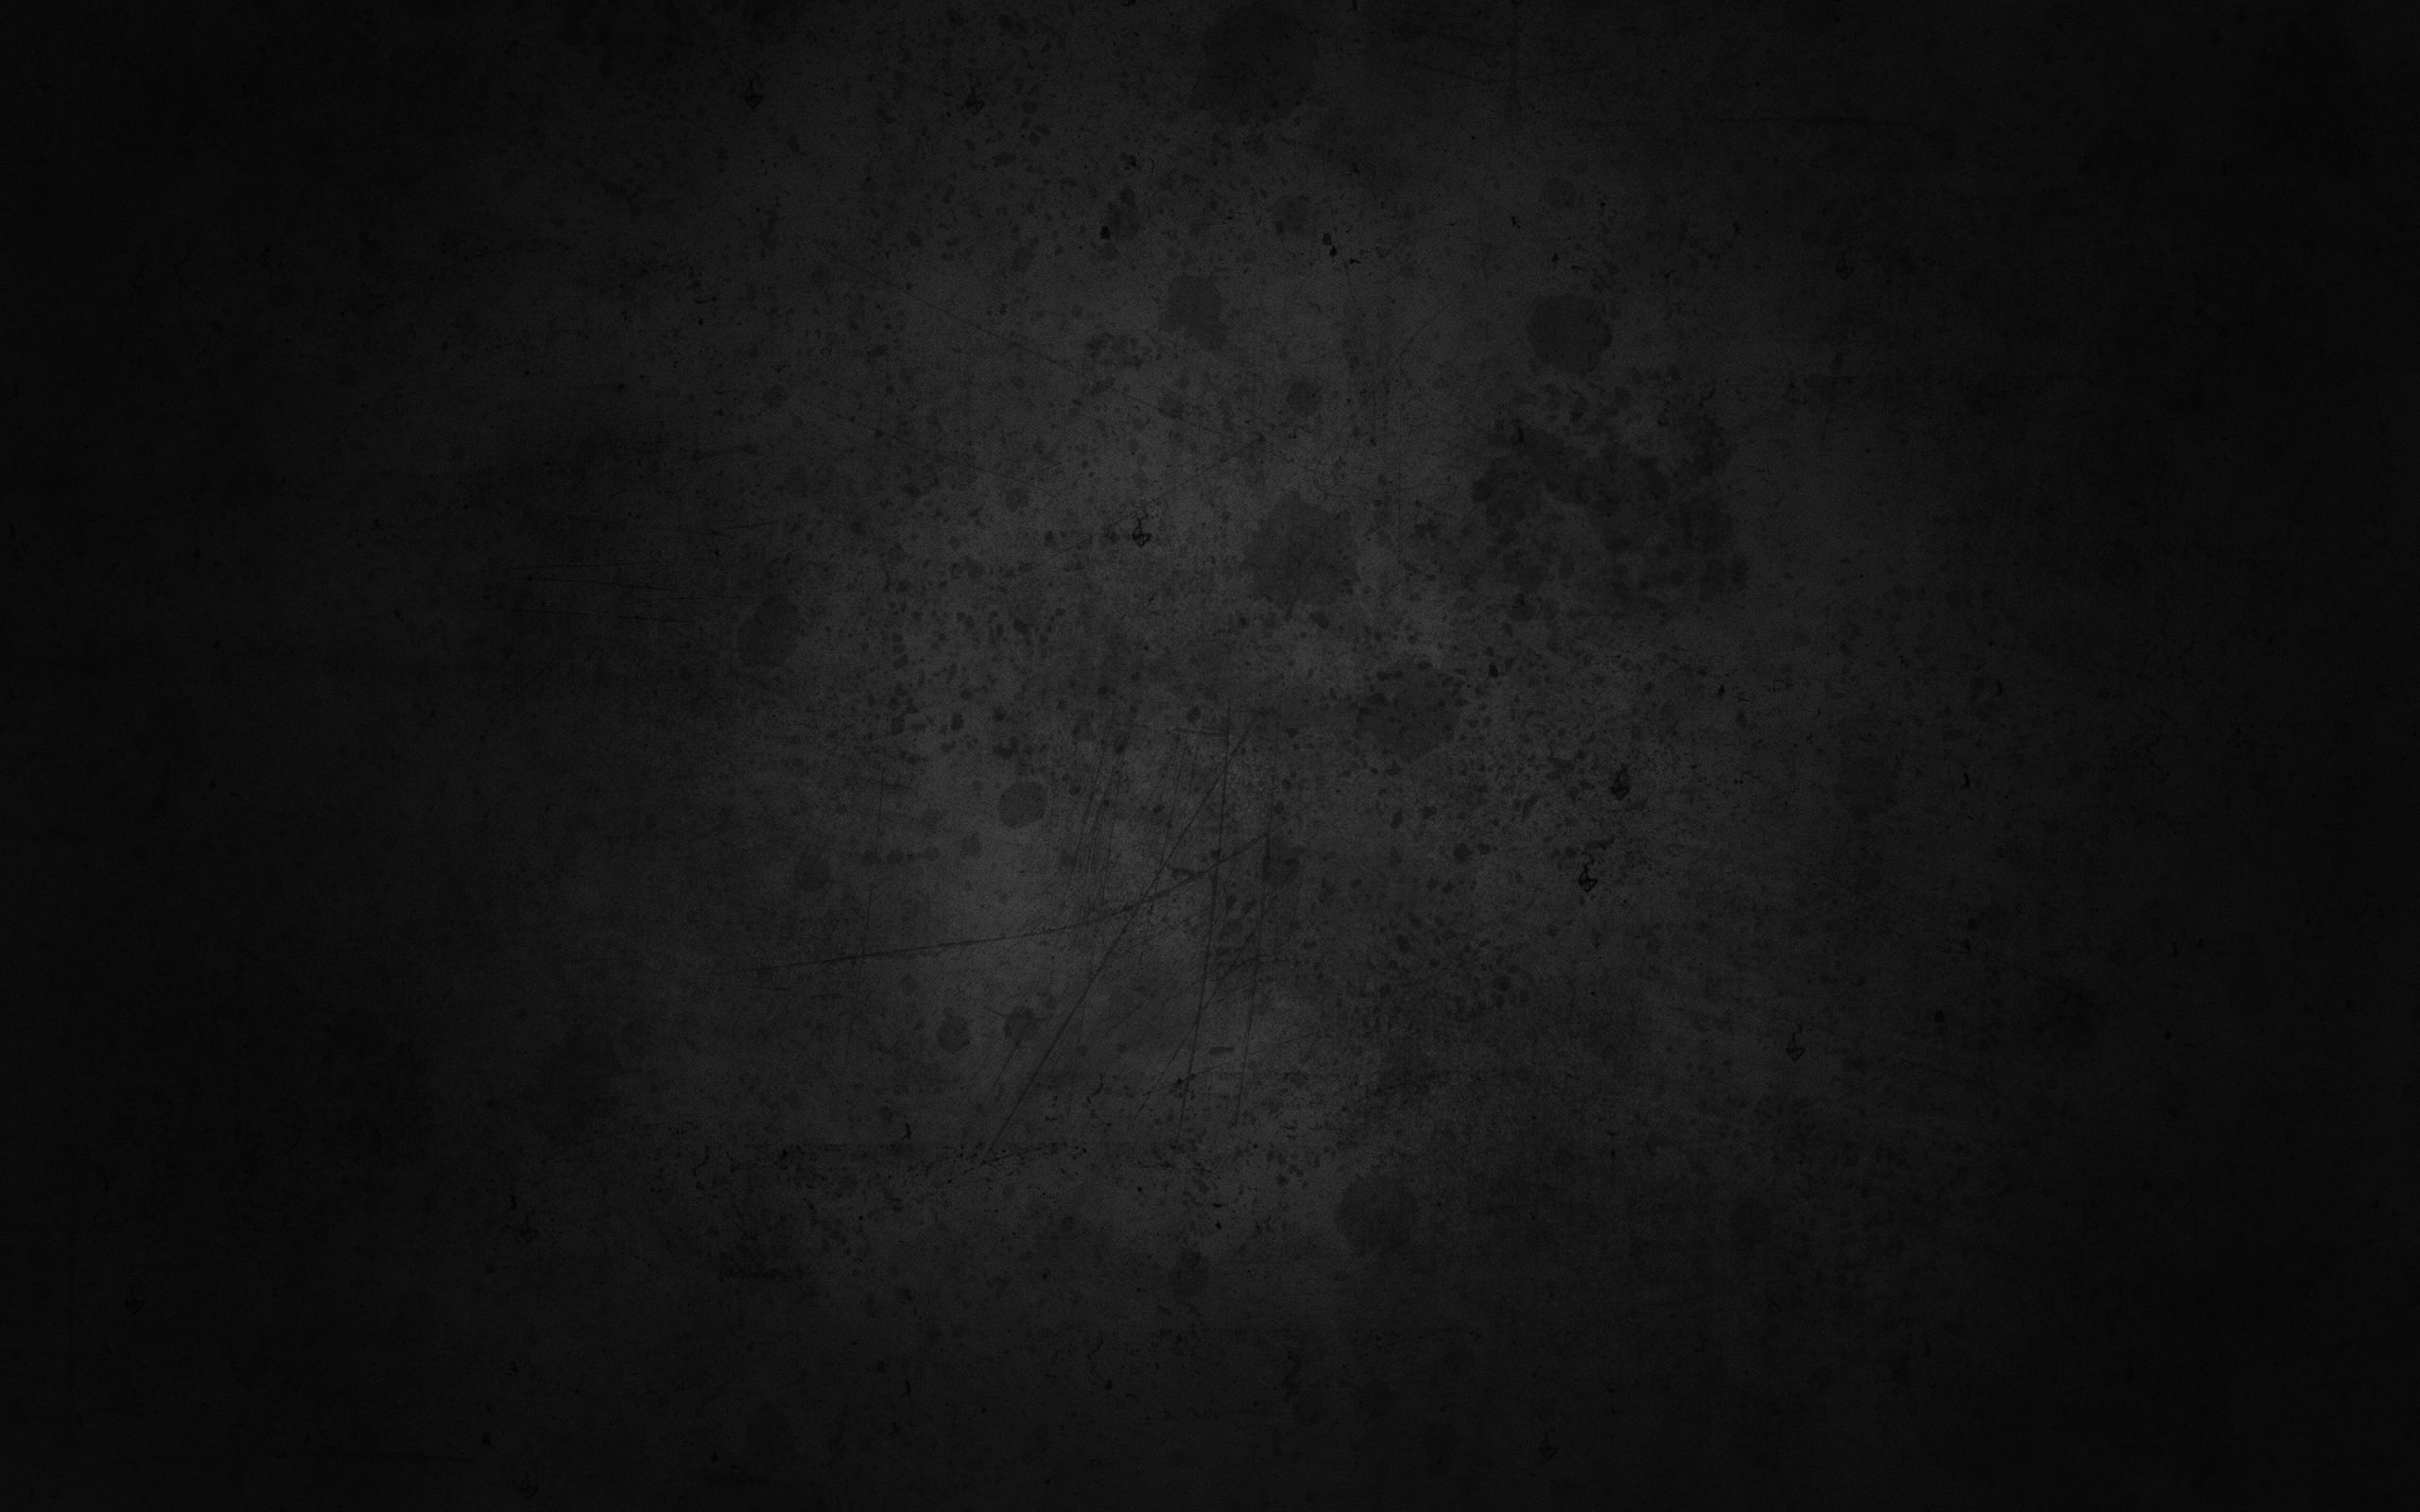 Black Texture Backgrounds The Art Mad Backgrounds